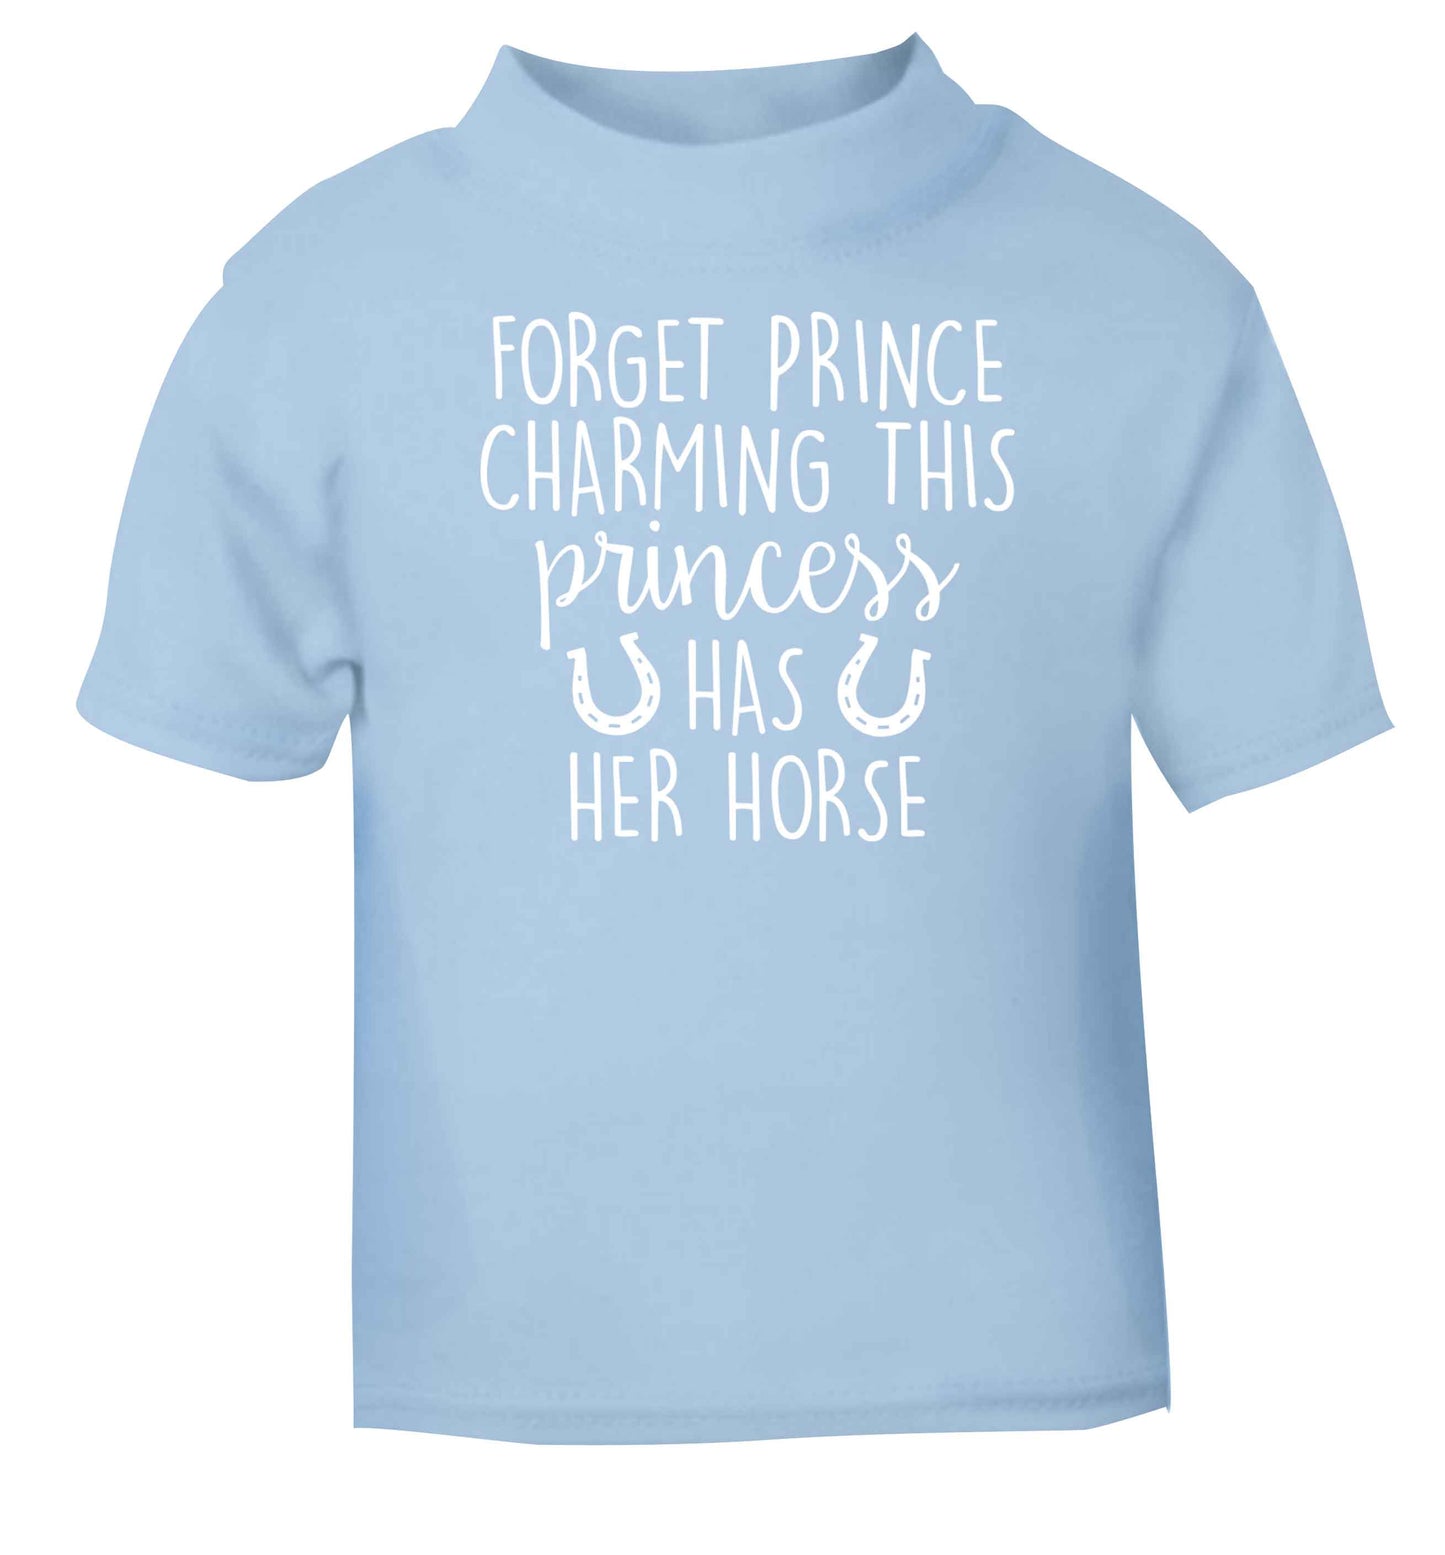 Forget prince charming this princess has her horse light blue baby toddler Tshirt 2 Years